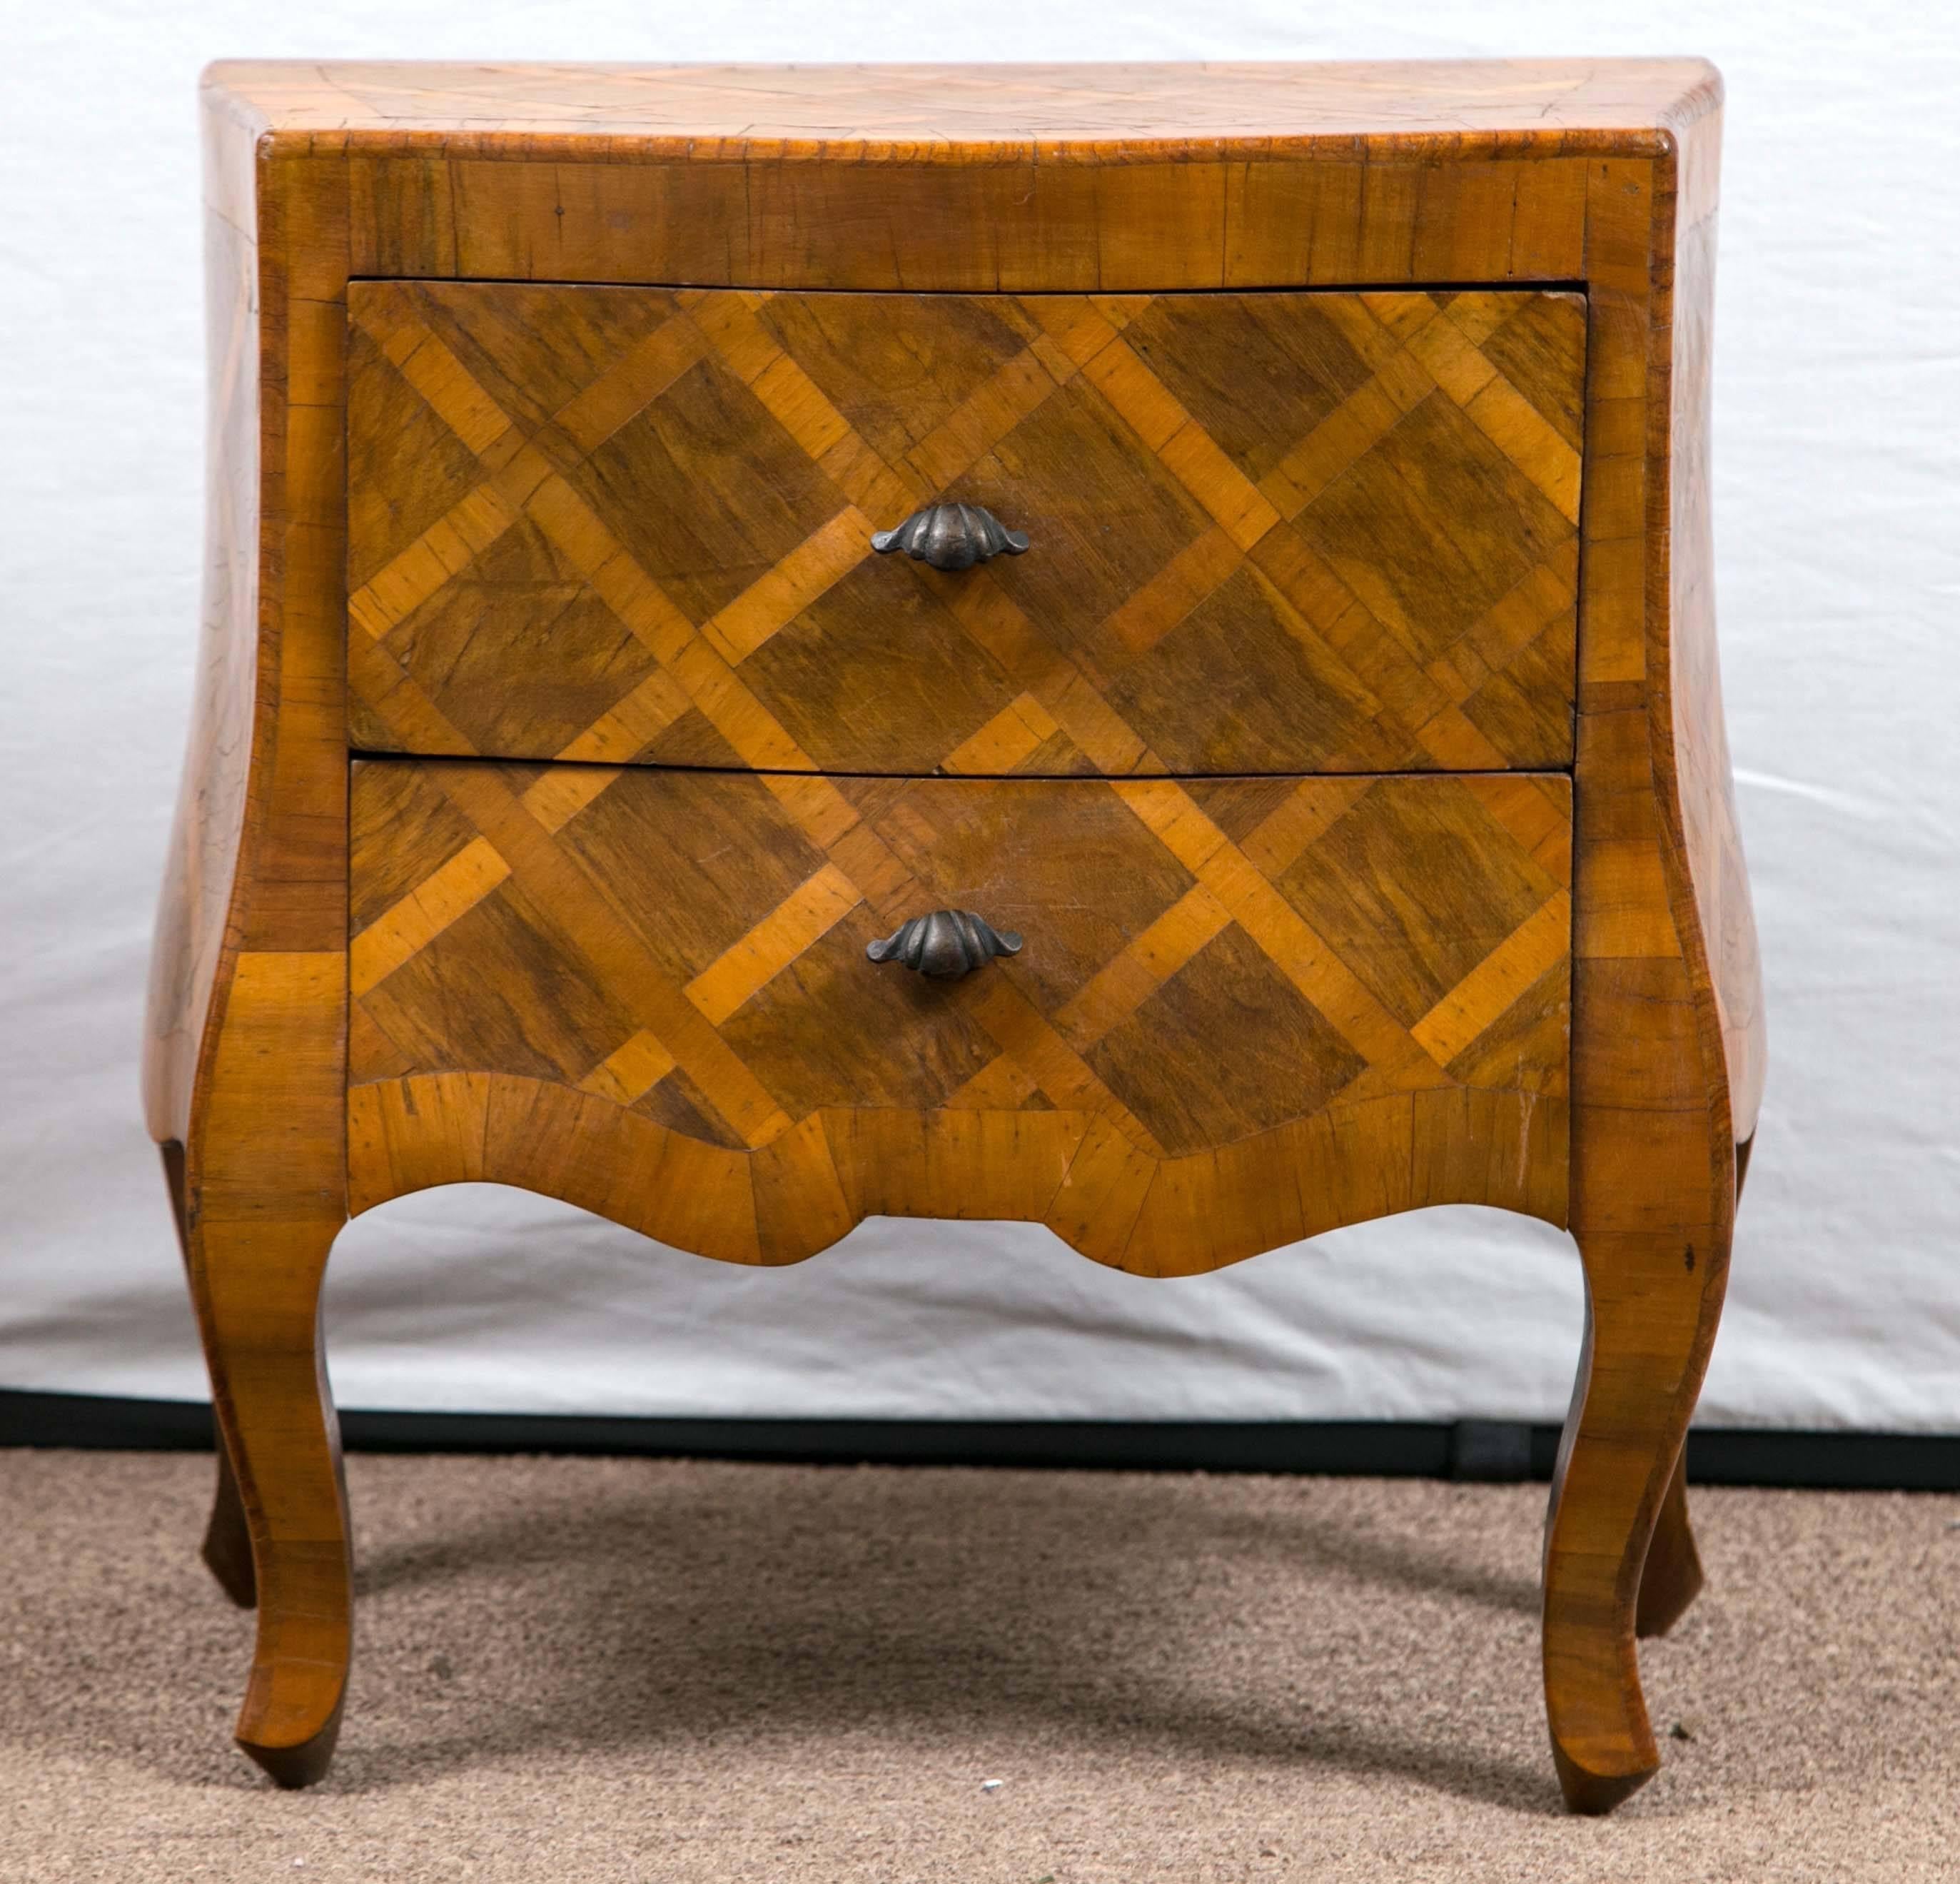 The shaped rectangular top with a bombe case fitted with two long drawers on cabriole legs, the whole inlaid with lattice work marquetry.